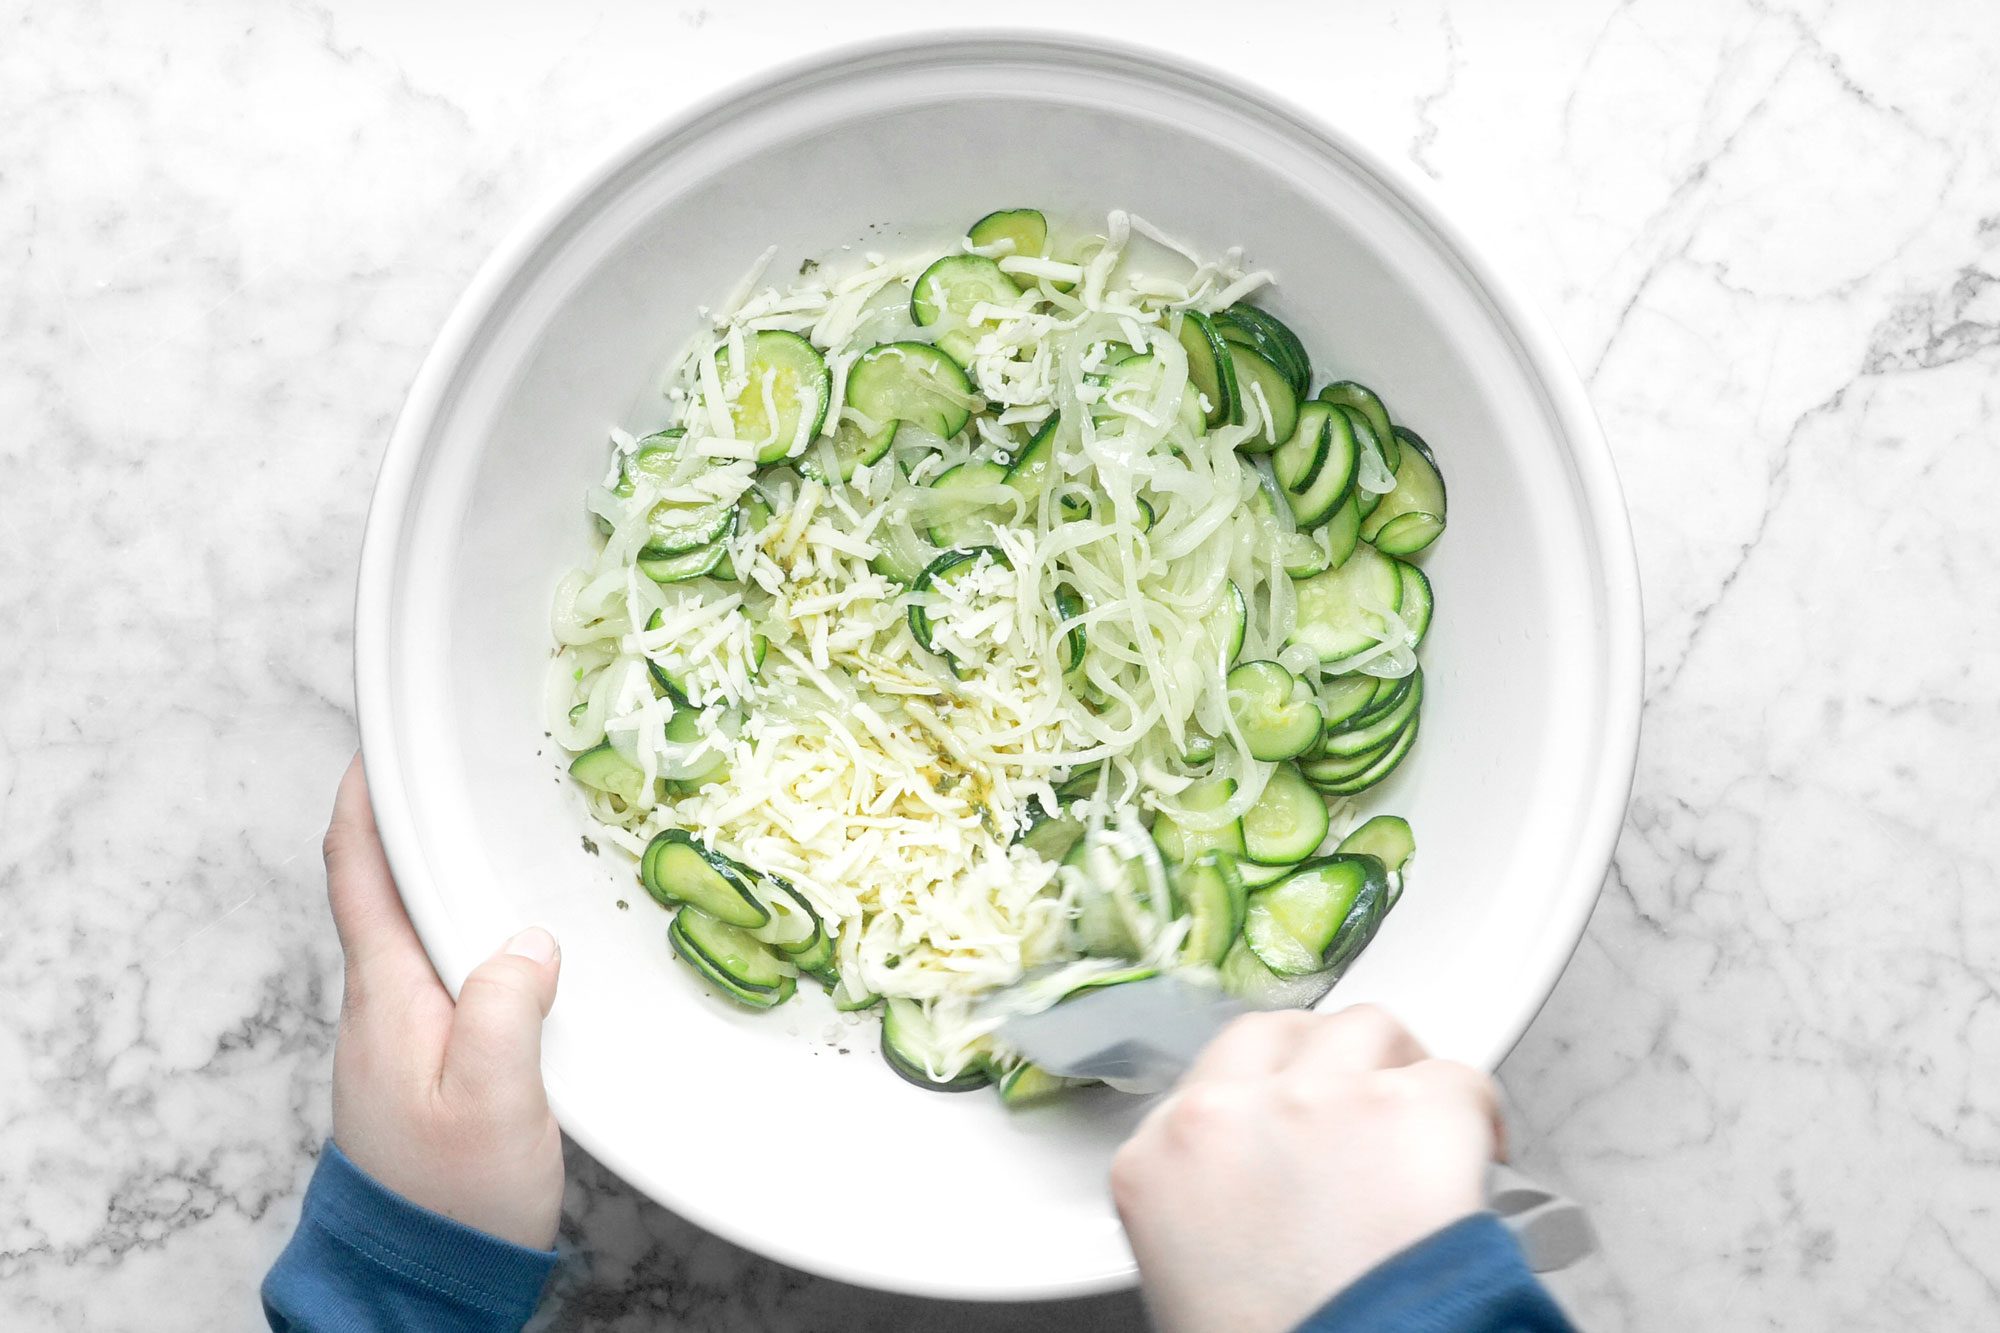 Mixing Zucchini and Cheese in a large white ceramic bowl on marble surface